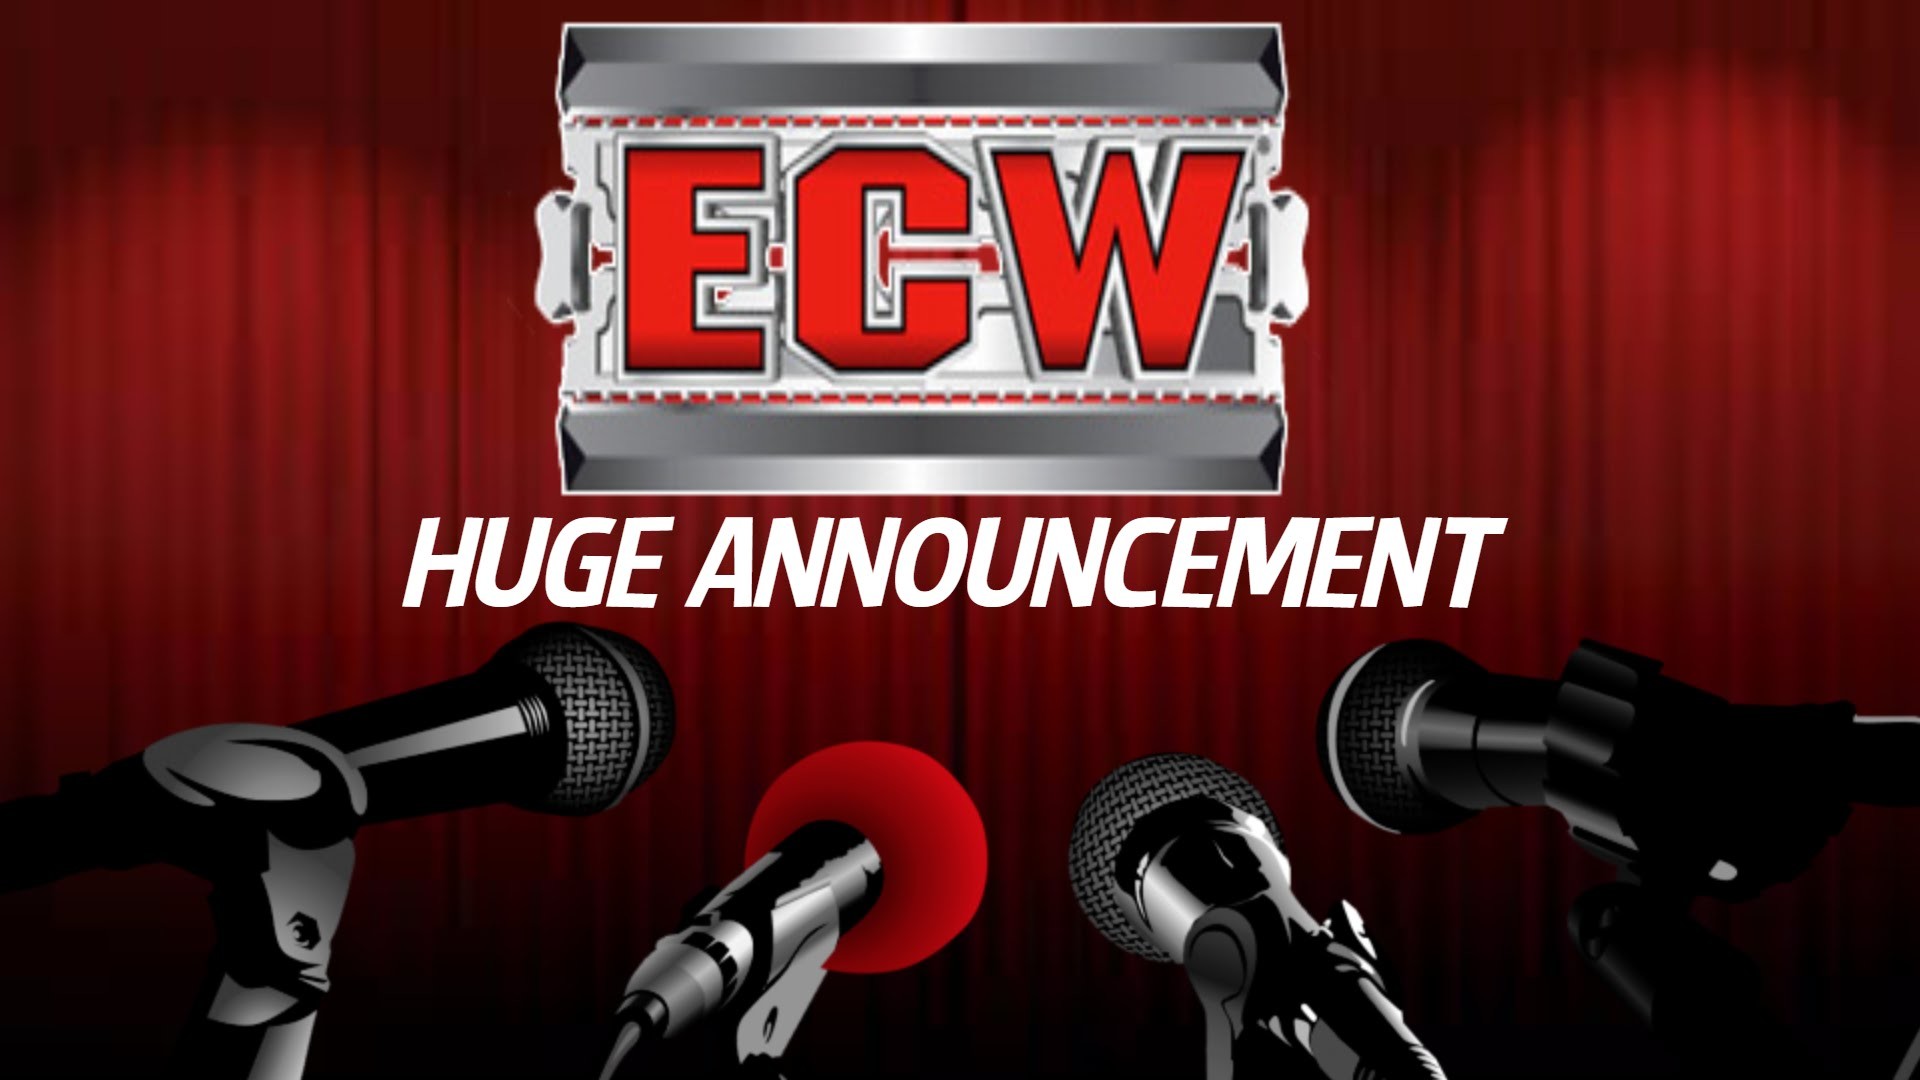 1920x1080 ECW Huge Announcement for 2016